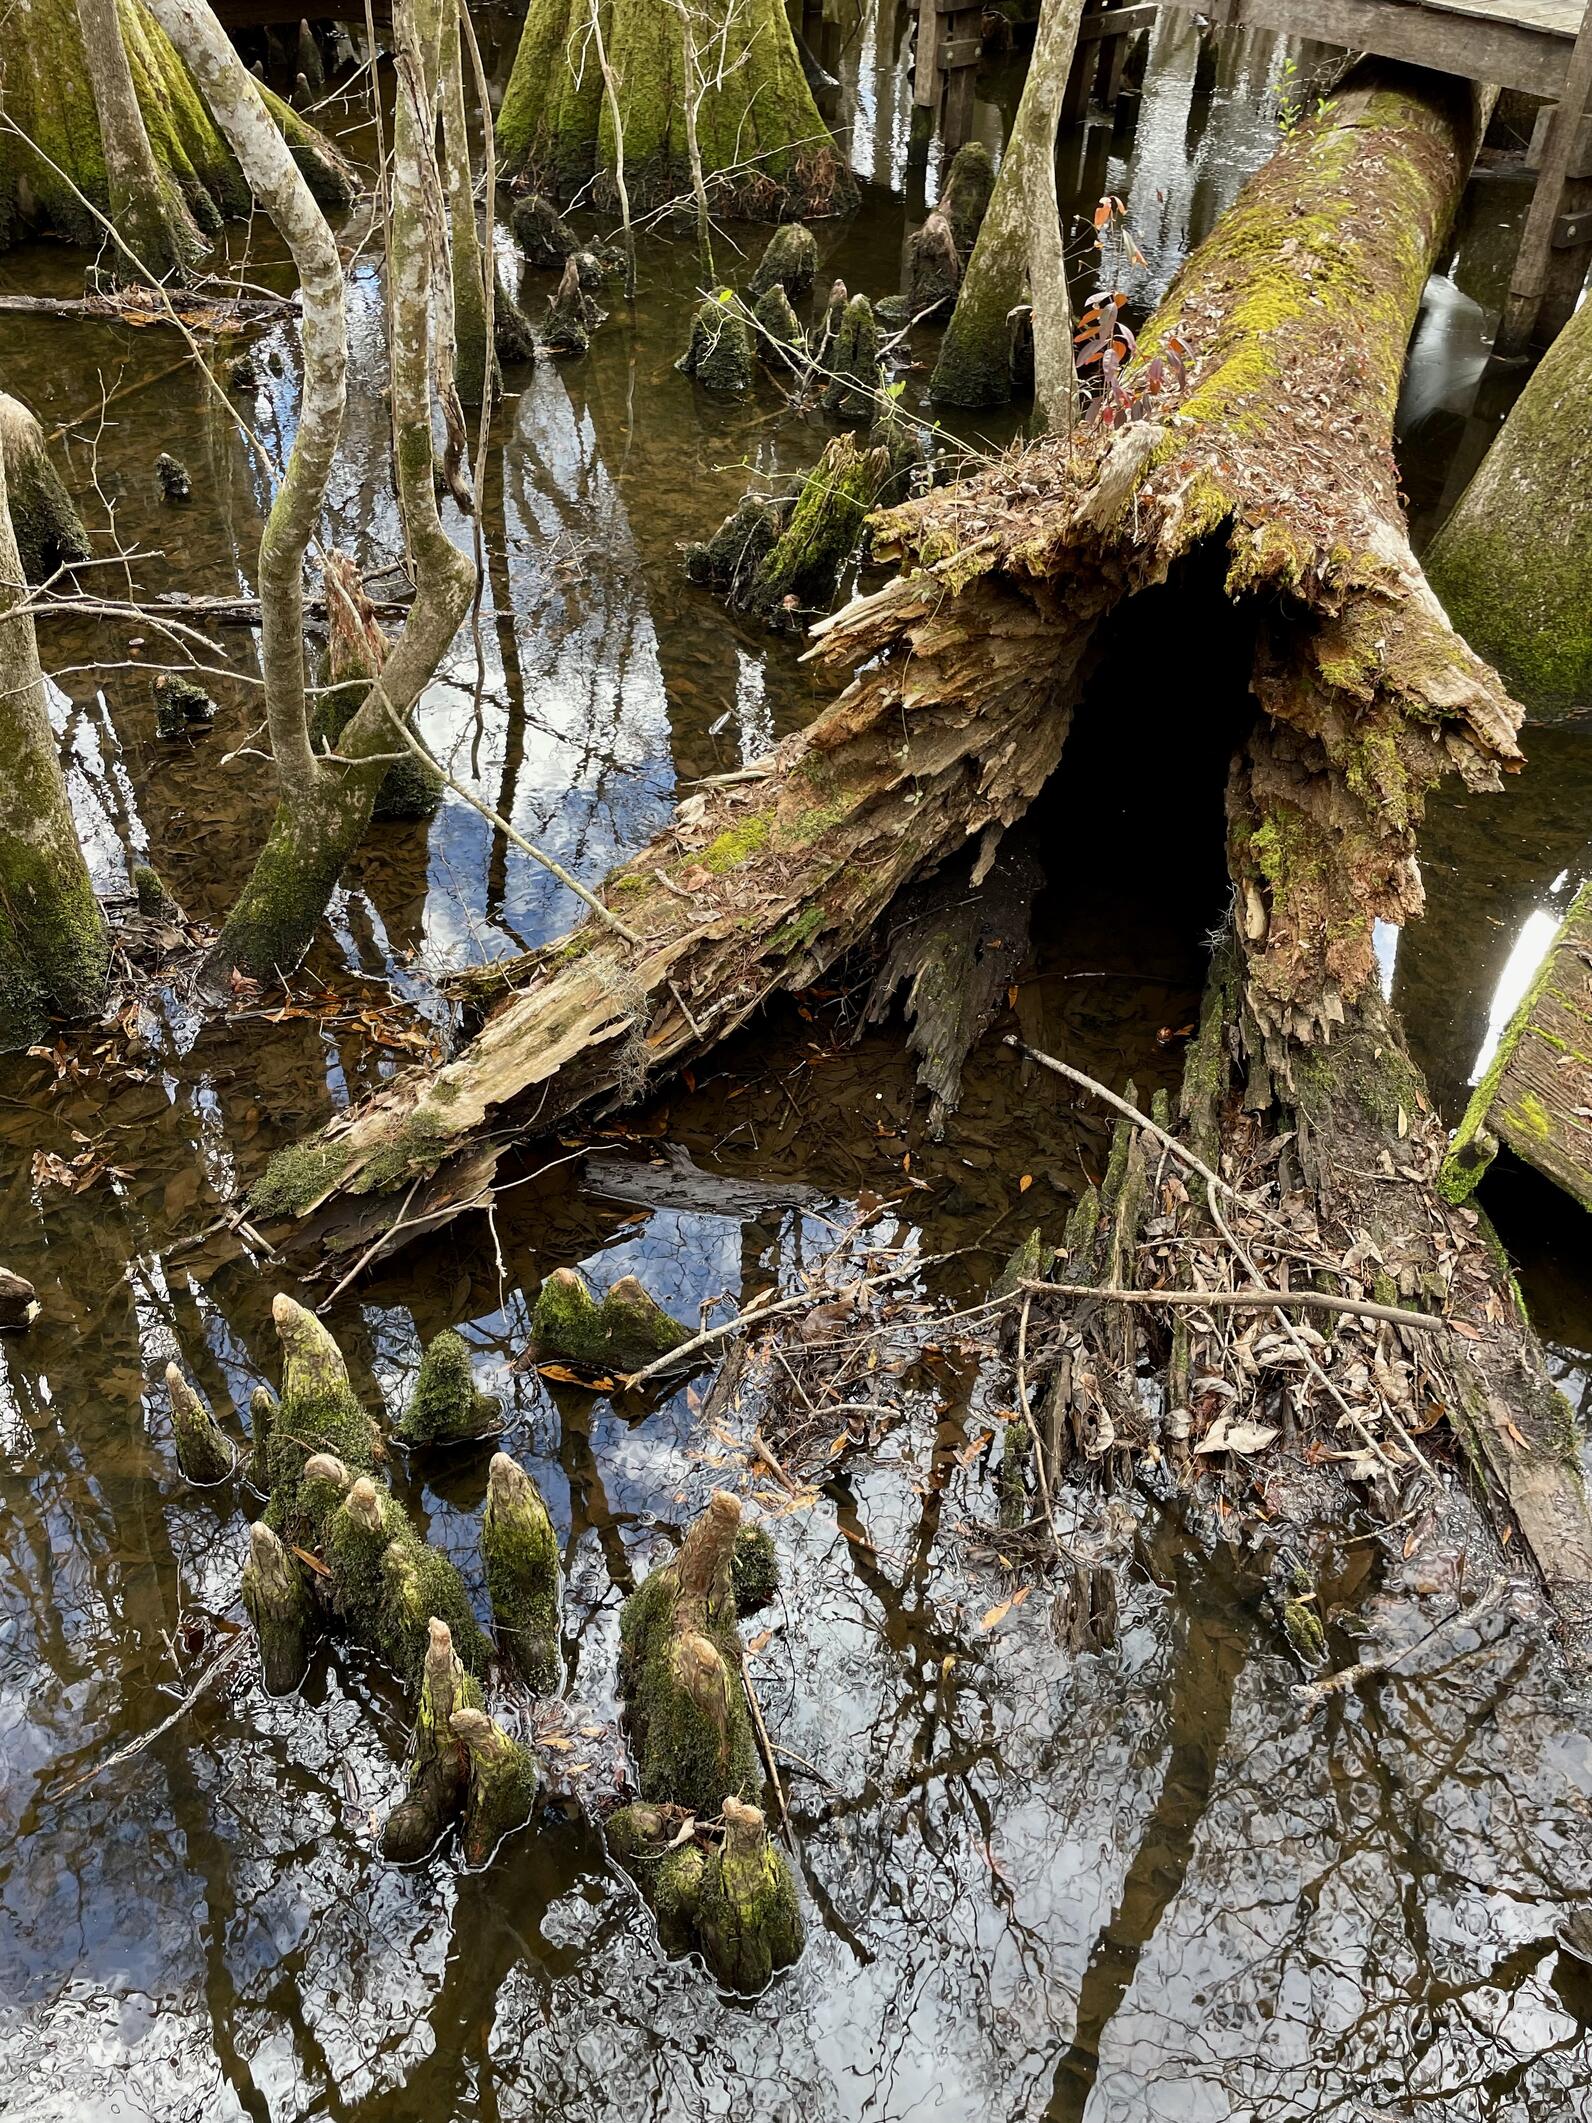 The trunk of a large cypress lies on the ground, its wide base opening towards us and revealing a hollow space within. It is surrounded by water and the top is covered in leaves. It has been on the ground for 30 years.